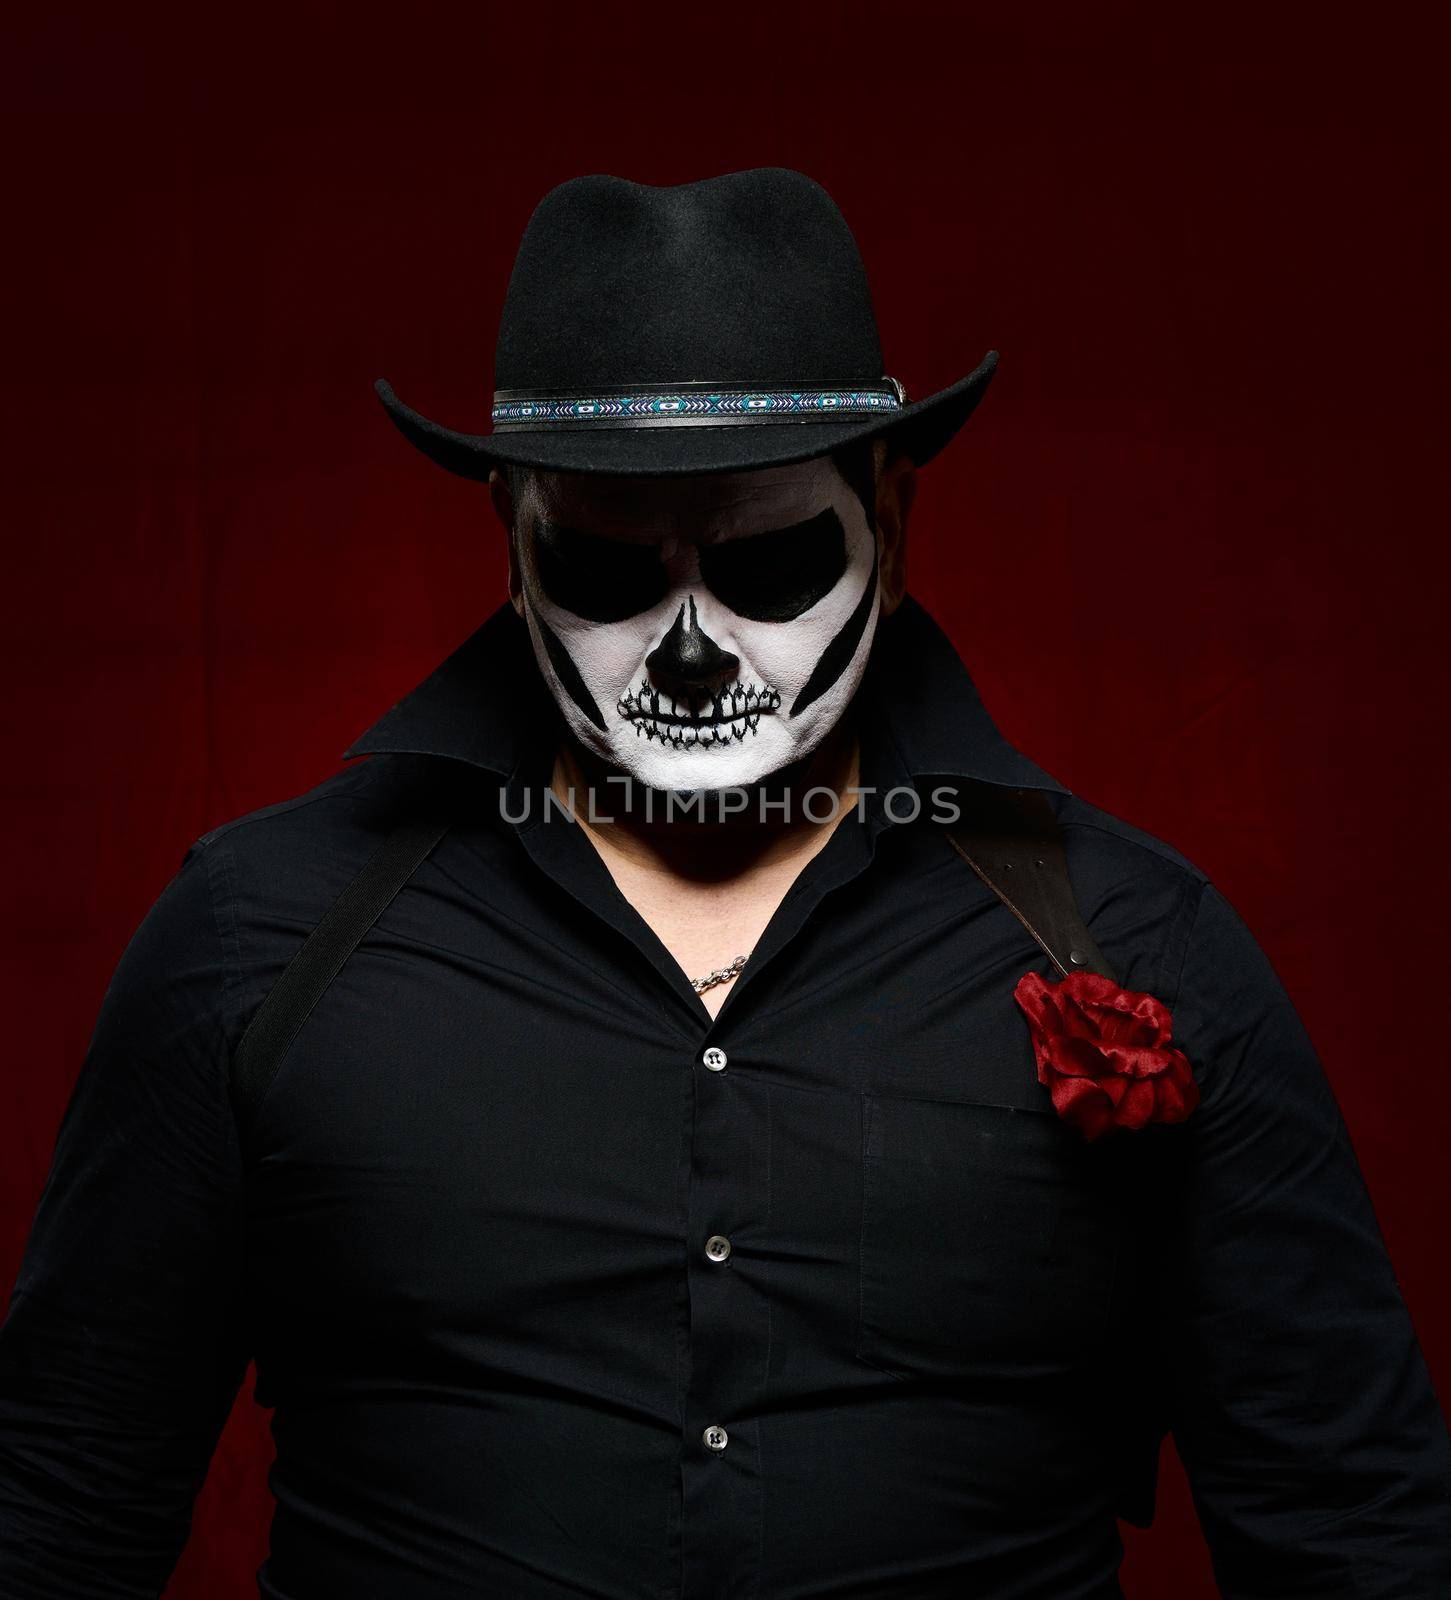 man is painted with a skeleton in a black hat and shirt, head down, red background